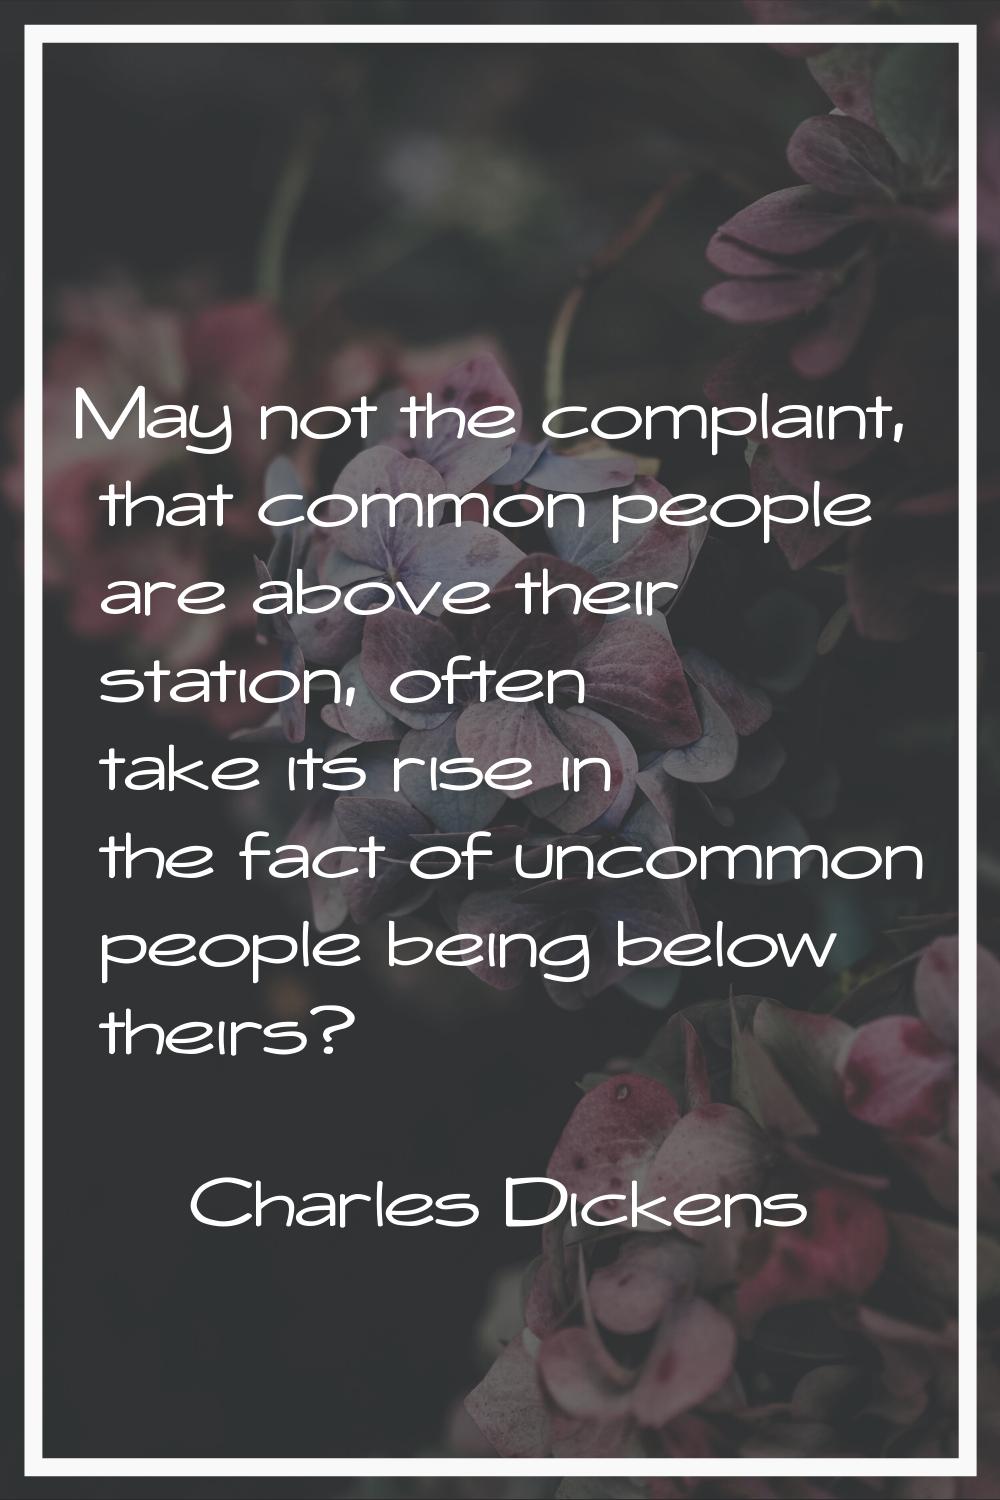 May not the complaint, that common people are above their station, often take its rise in the fact 